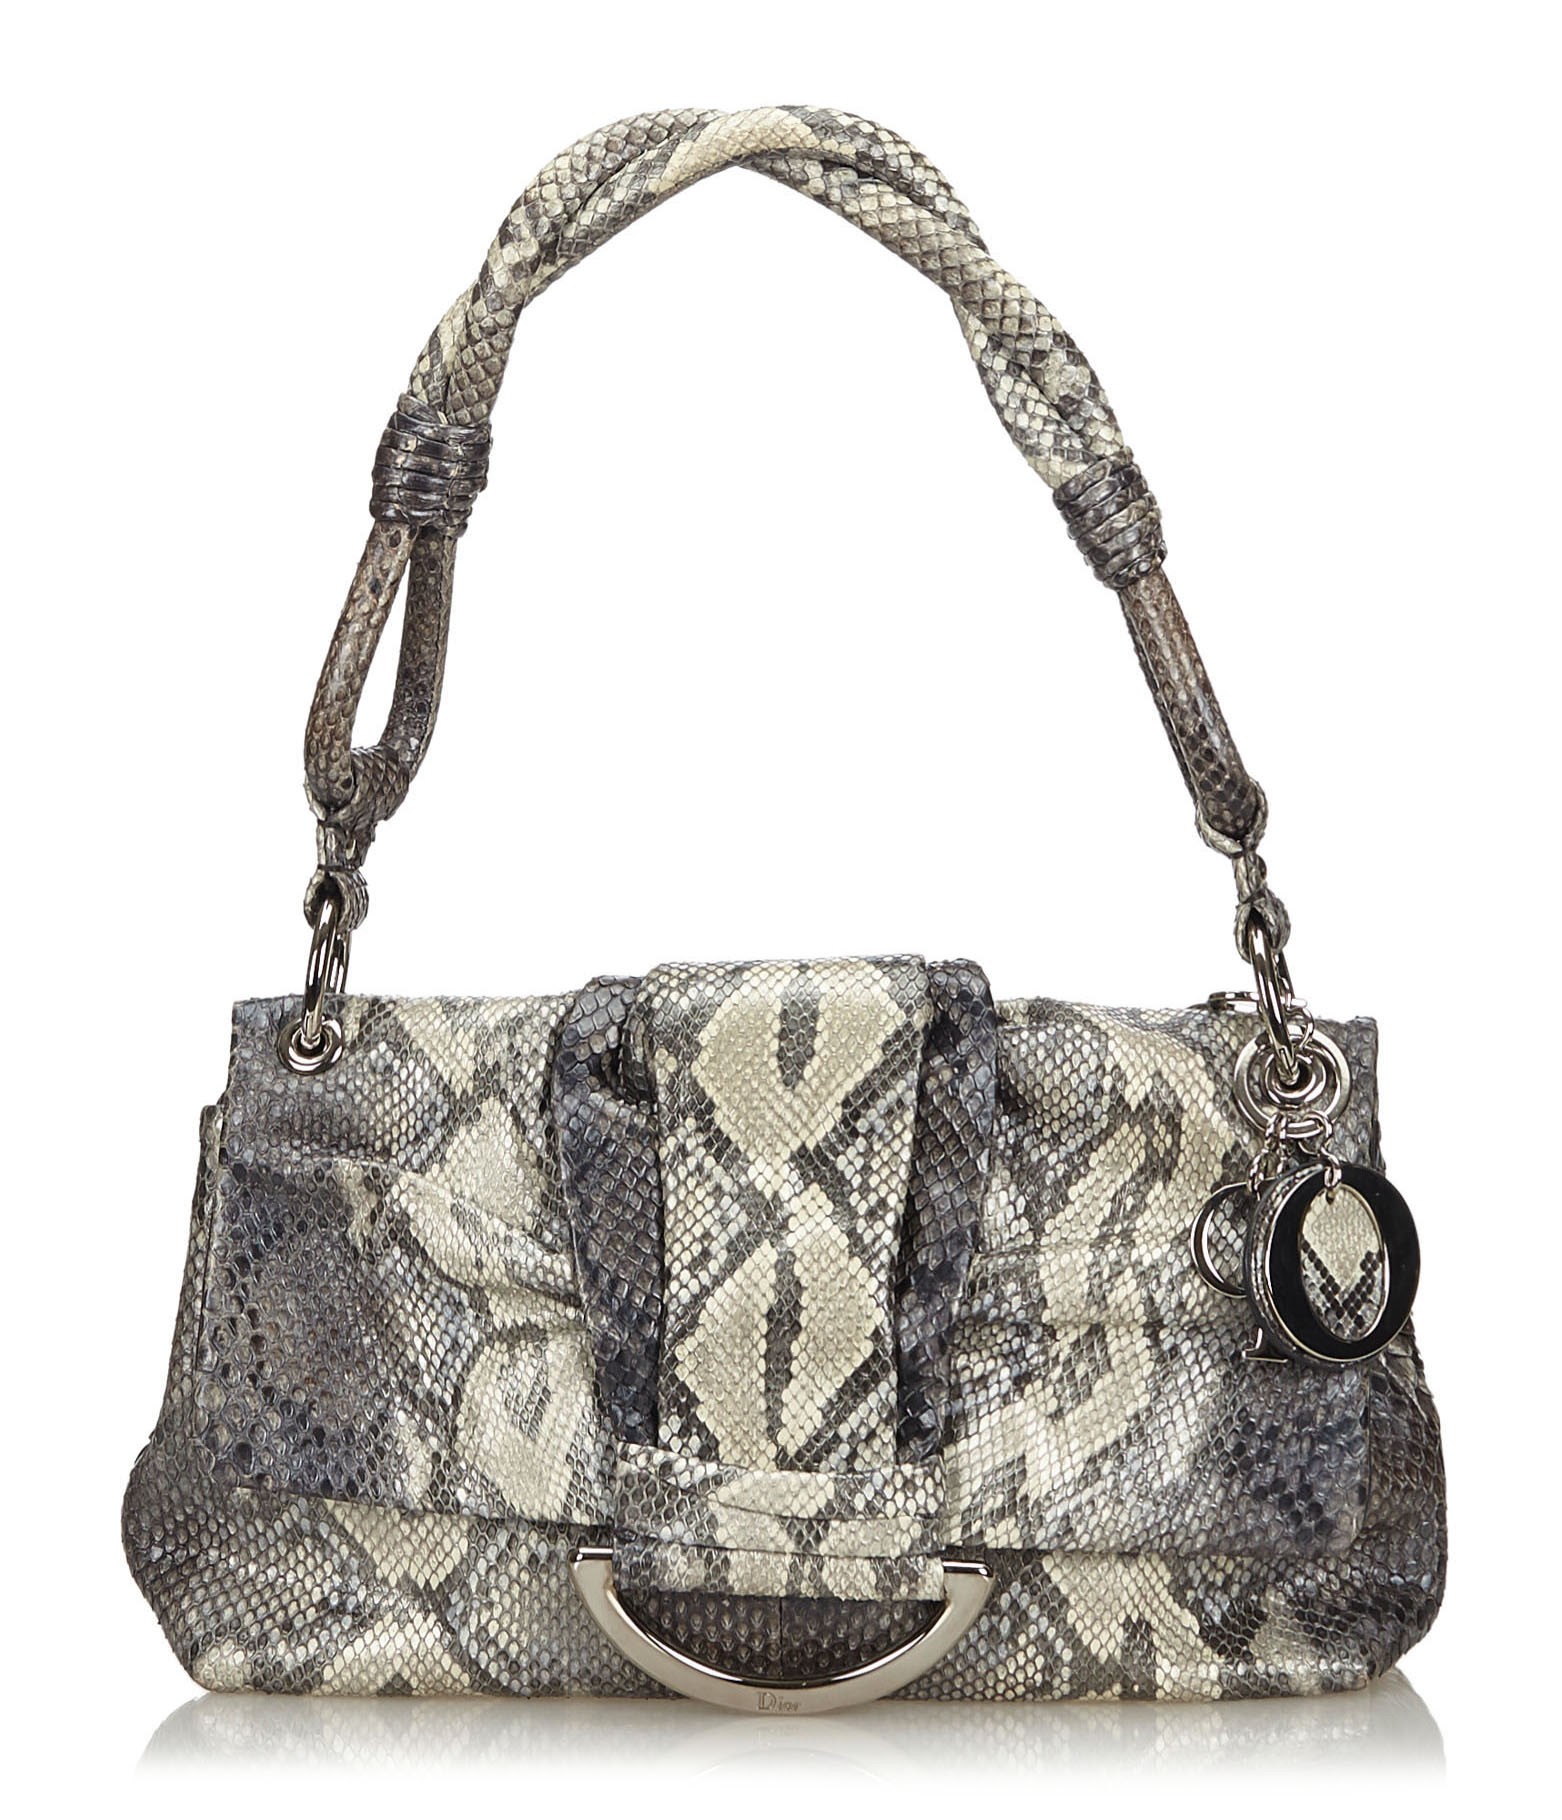 LONGCHAMP PYTHON EMBOSSED LEATHER BUCKET BAG Mint Condition BEAUTIFUL MSRP  $995